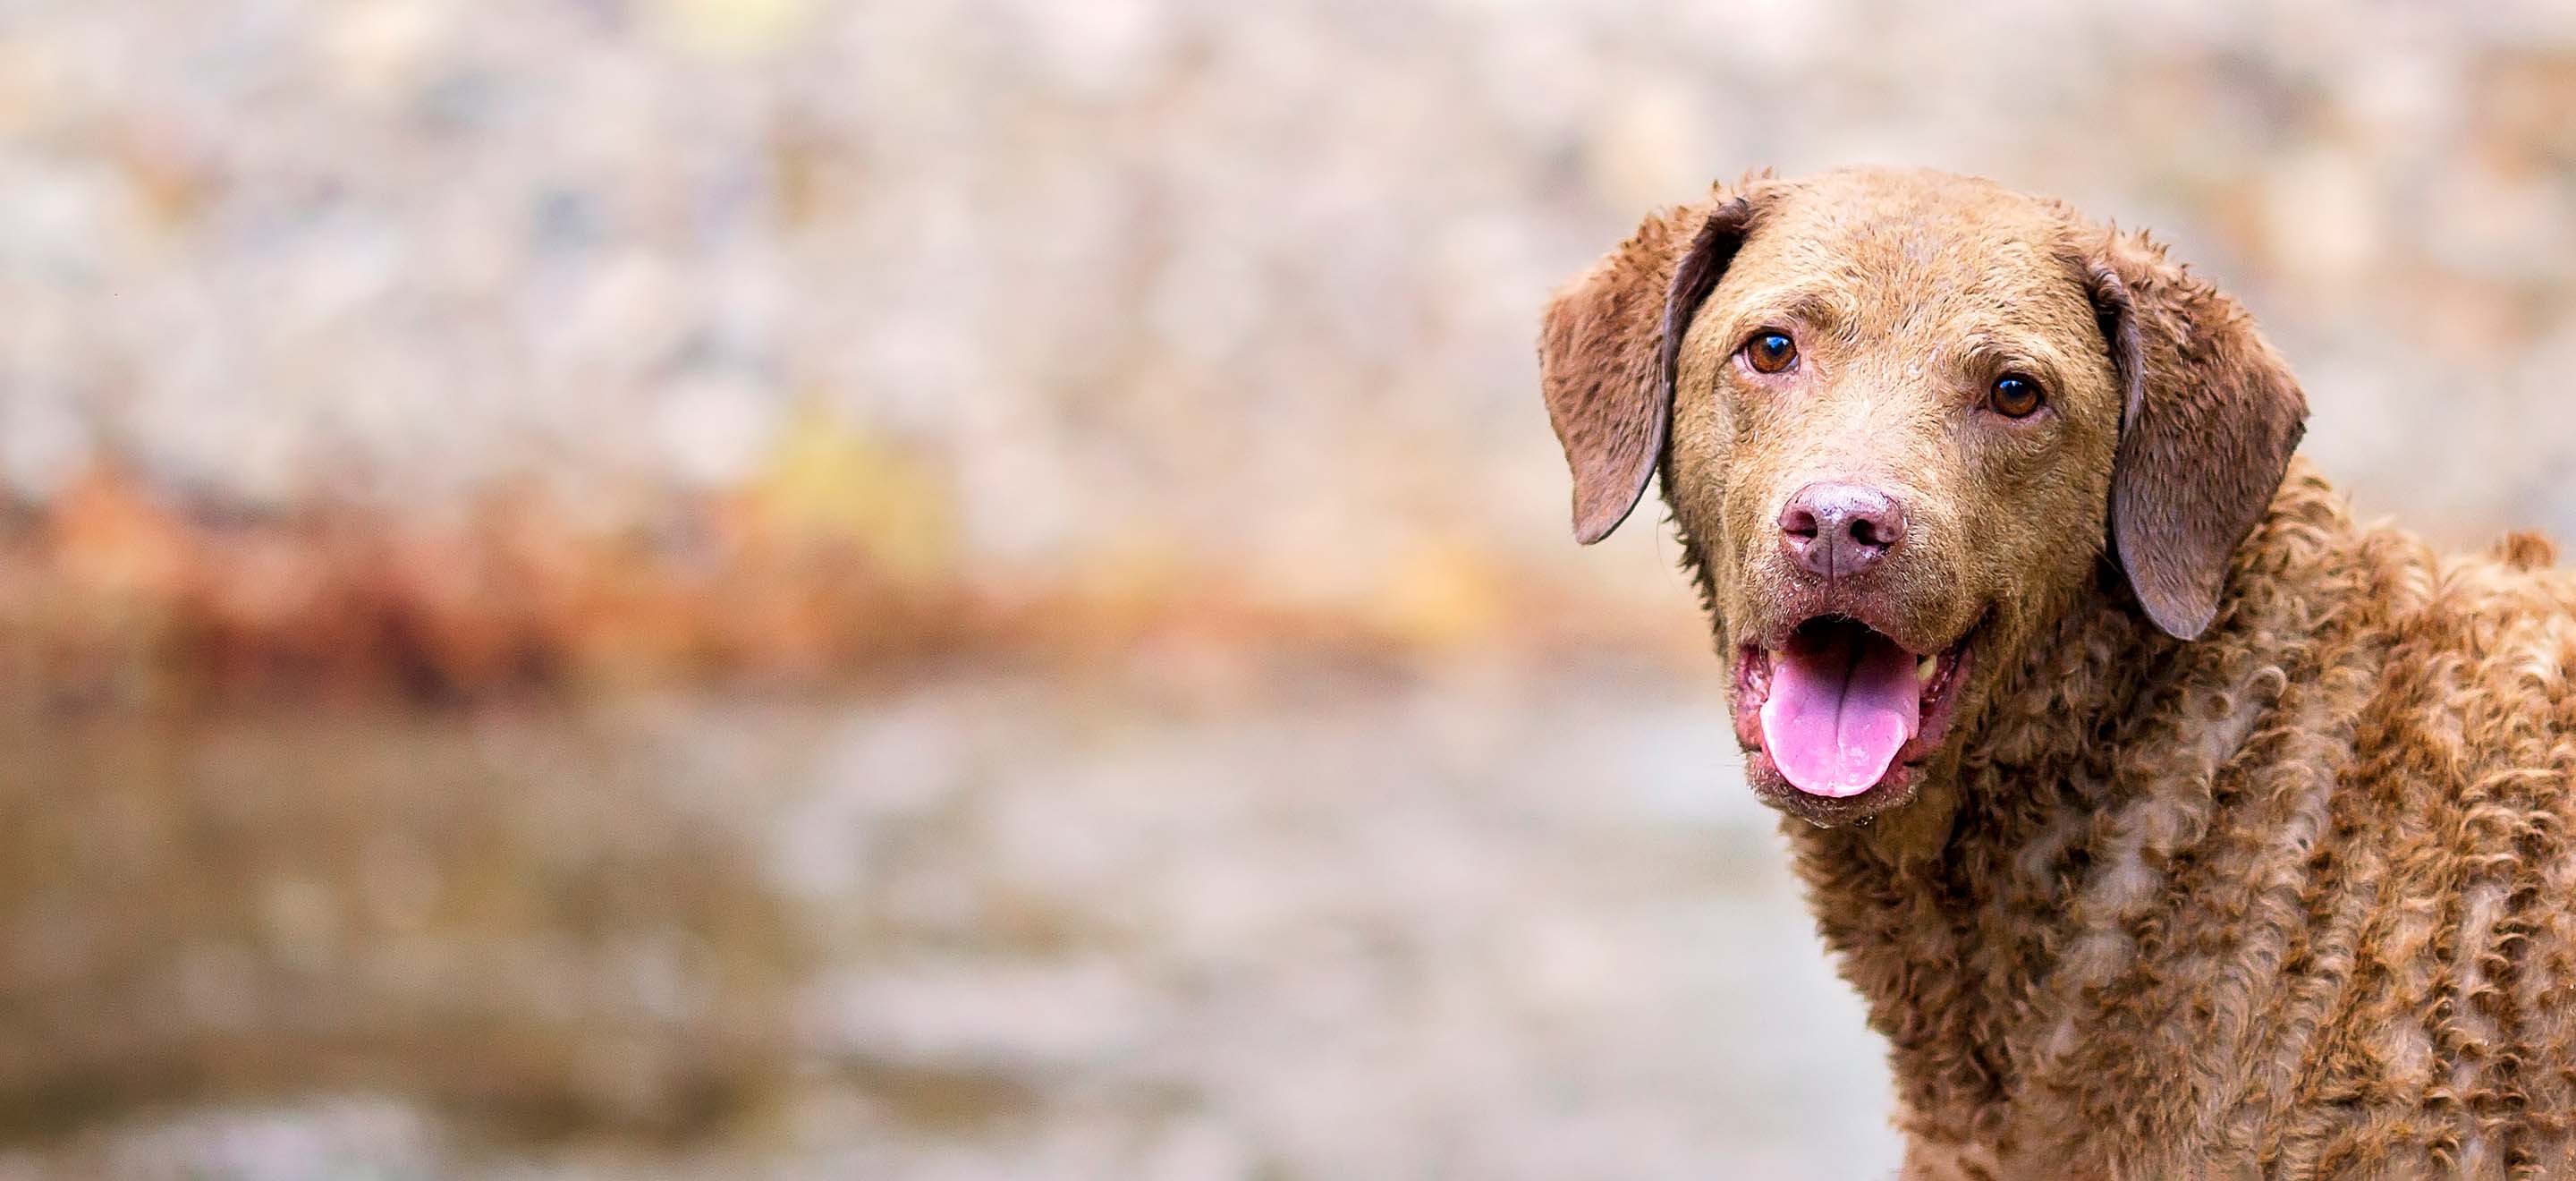 A close-up of a Chesapeake Bay Retriever dog standing outside image